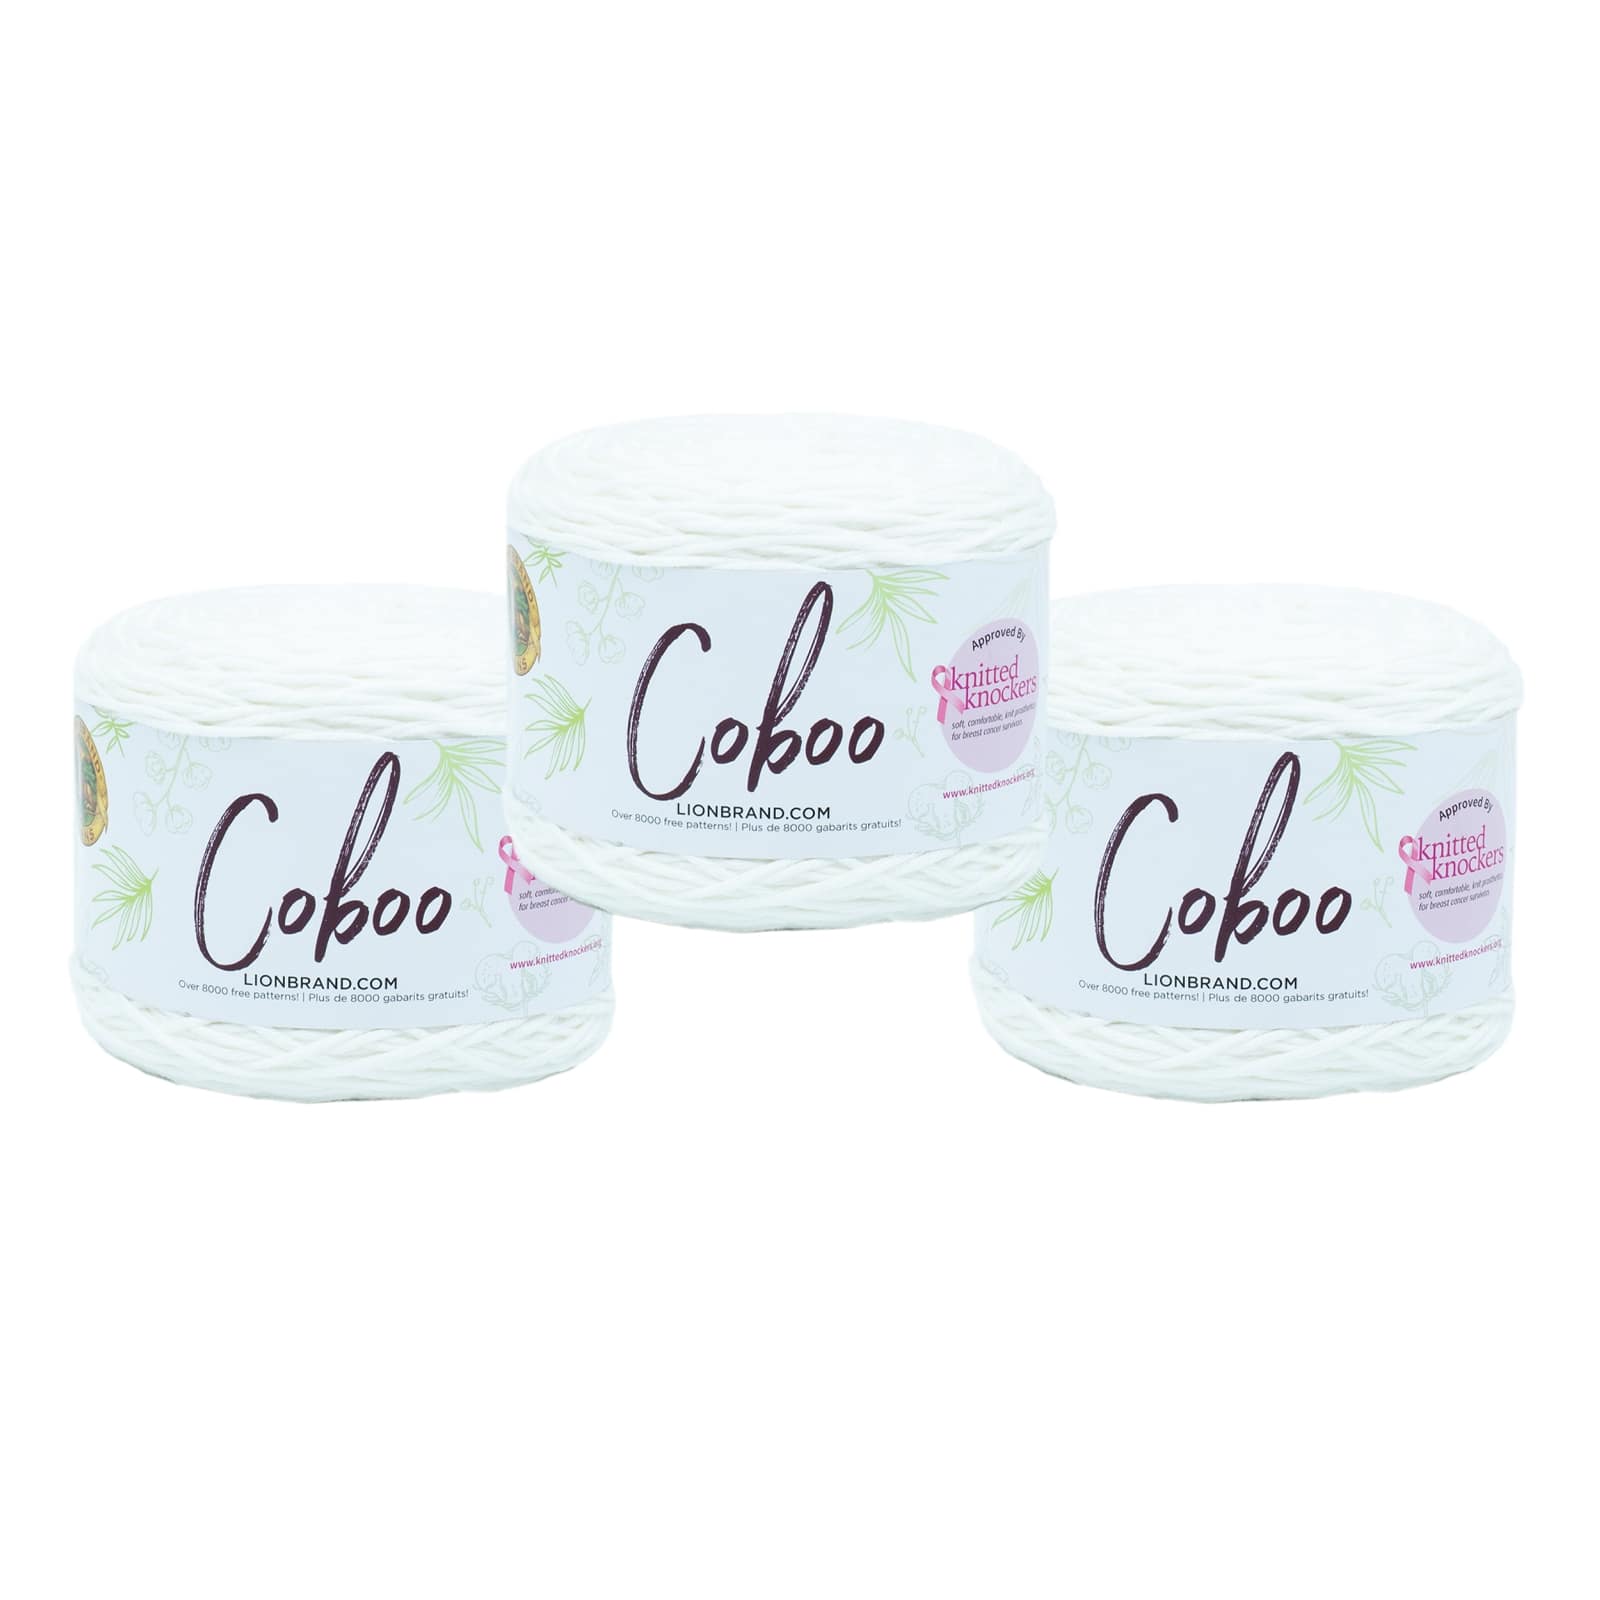 Made from Natural Fibers - Coboo! 